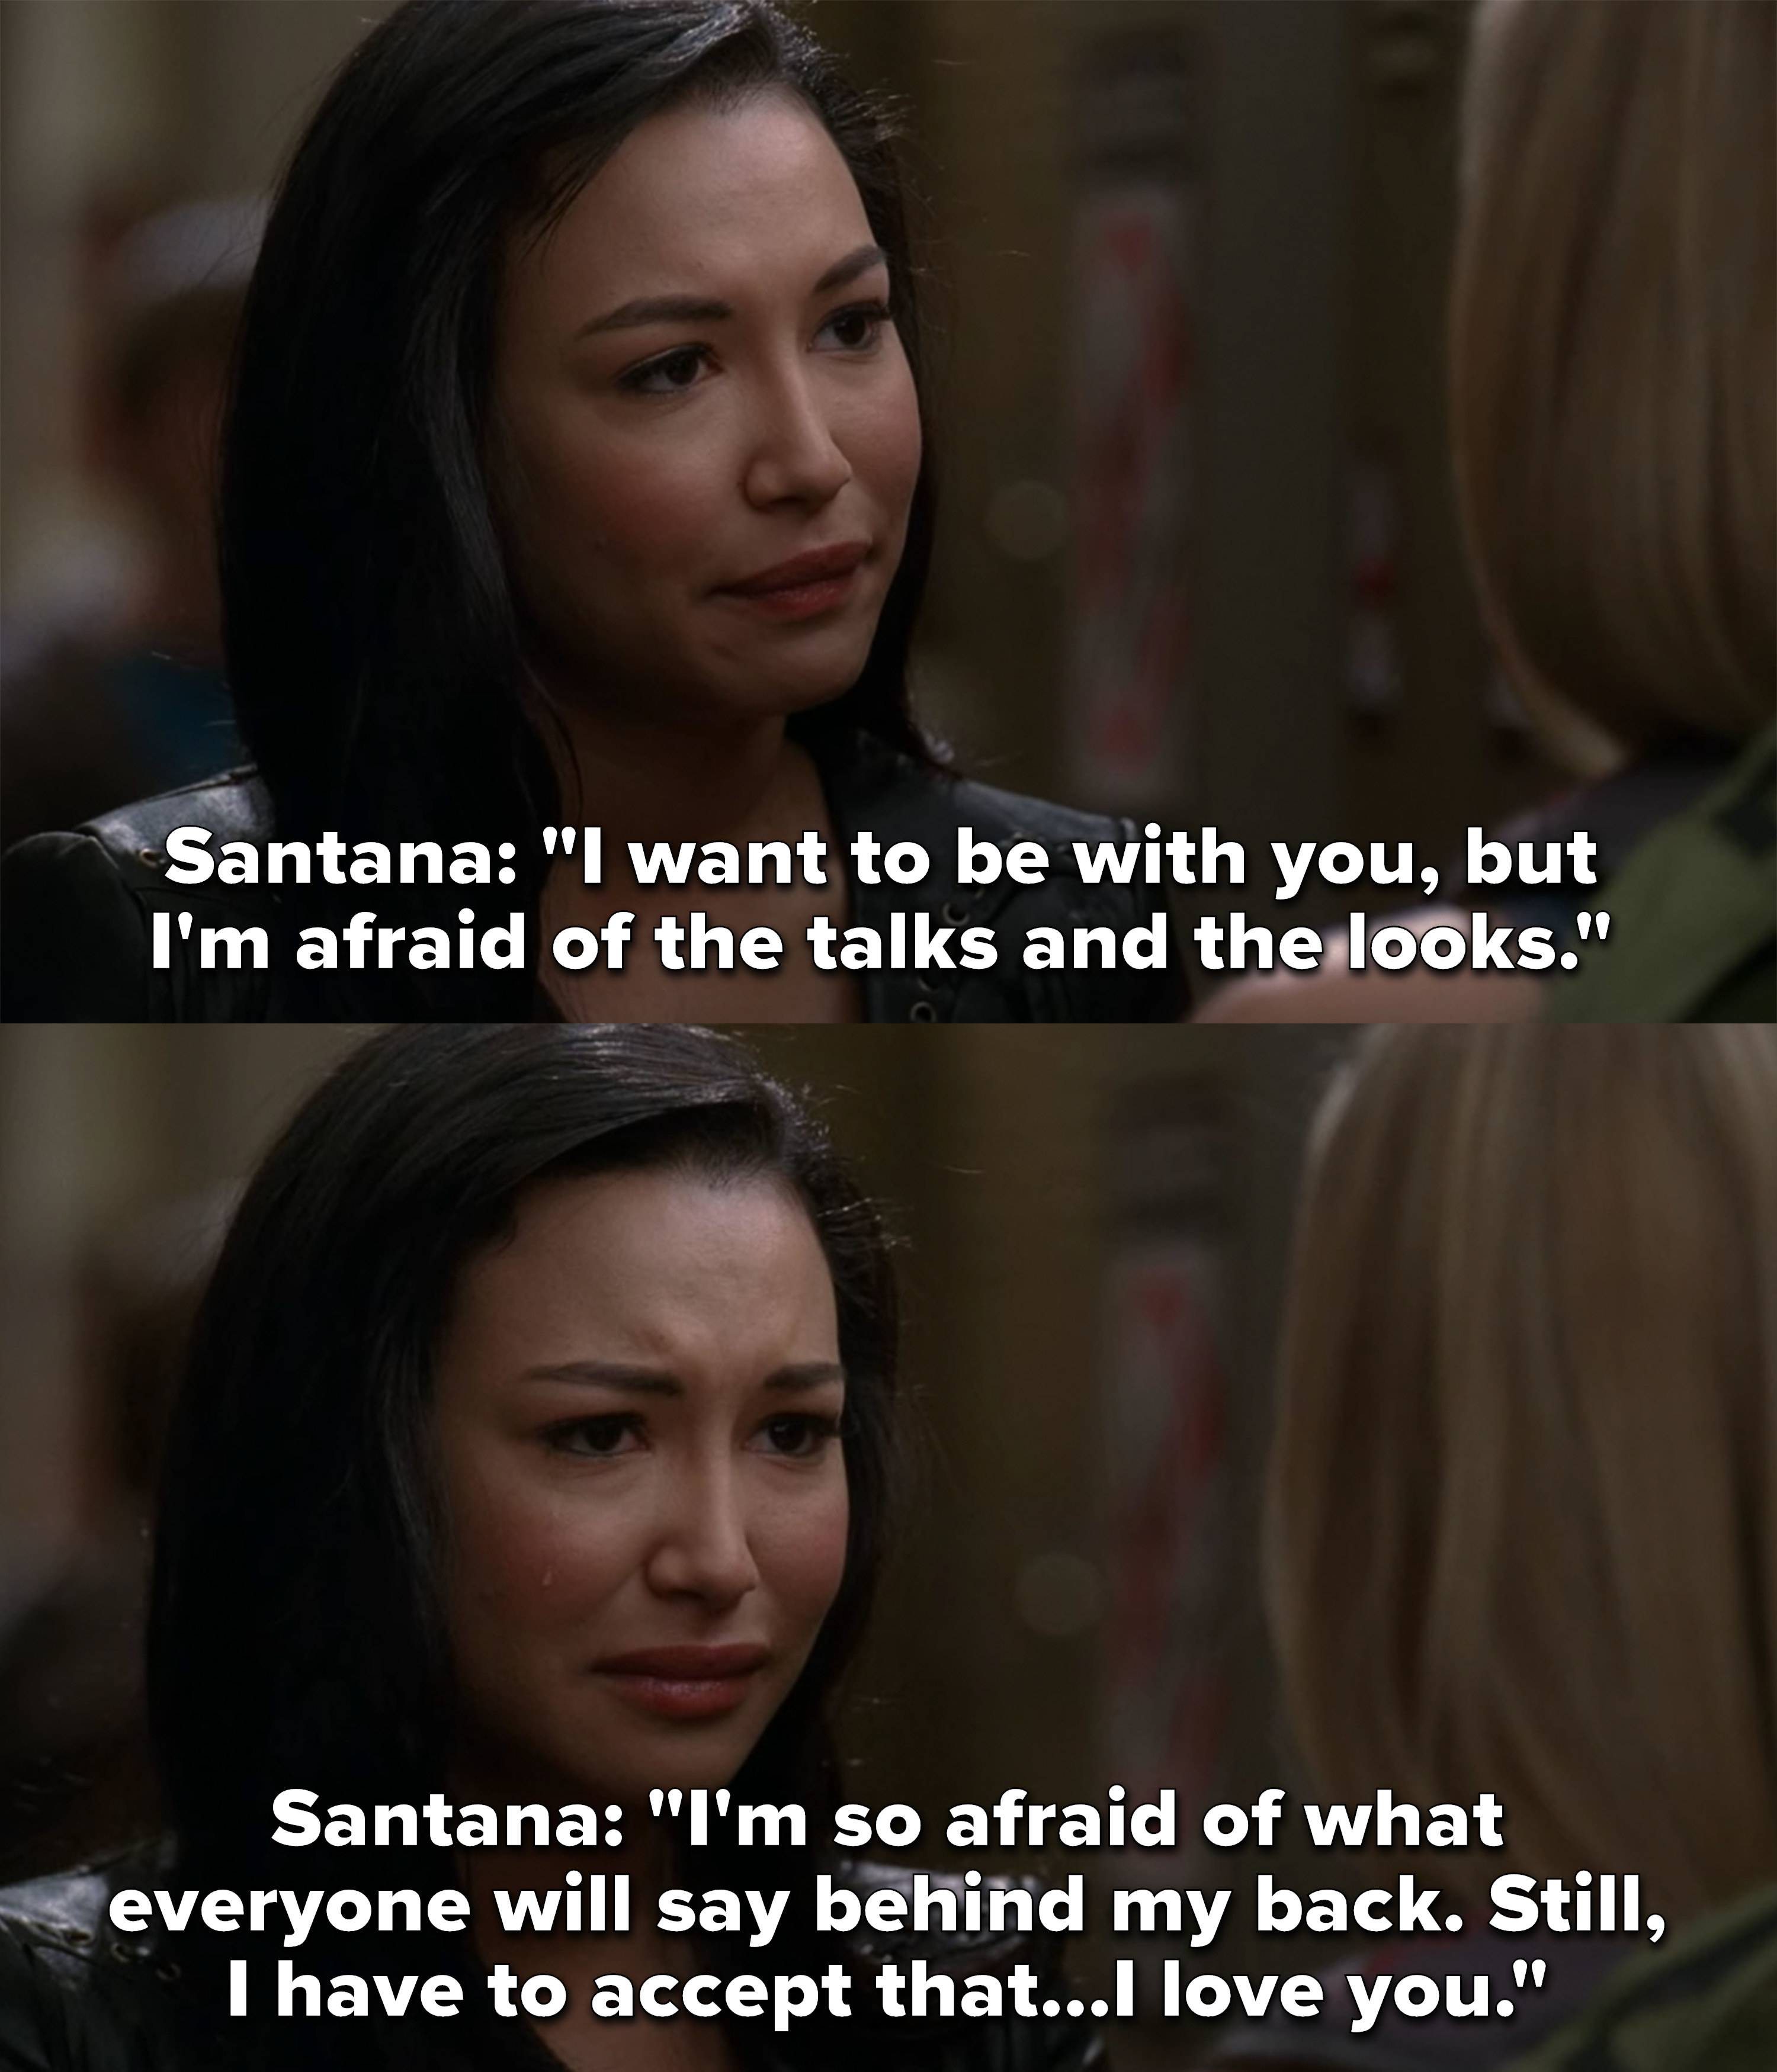 Santana: &quot;I want to be with you, but I&#x27;m afraid of the talks and the looks, I&#x27;m so afraid of what everyone will say behind my back, still I have to accept that I love you&quot;